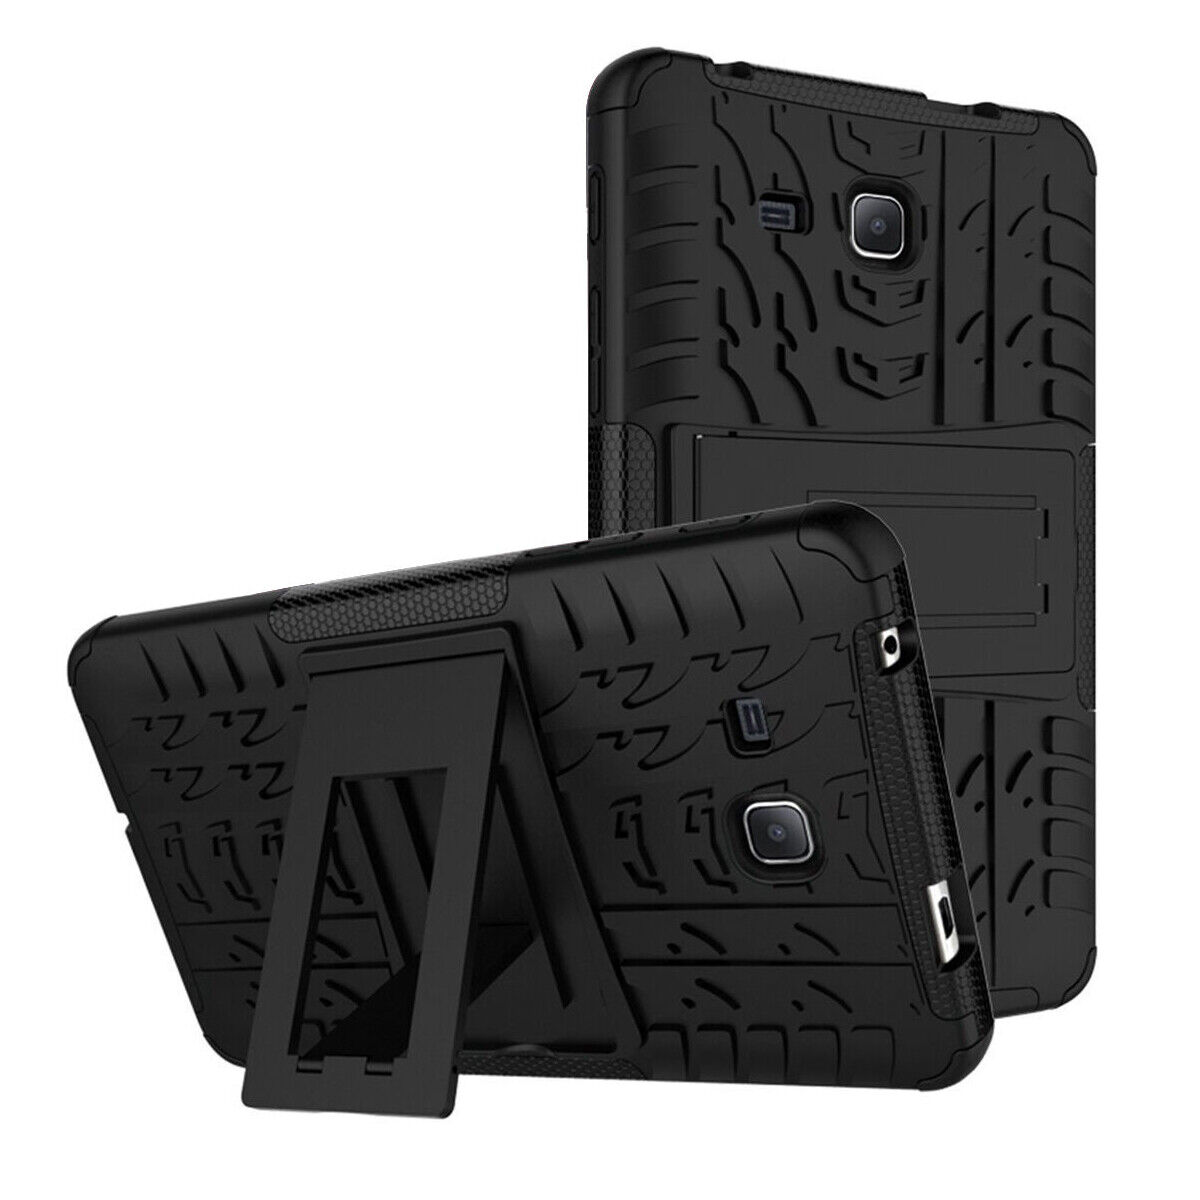 Hybrid Protective Hard Case Cover For Samsung Galaxy Tab A 7.0\